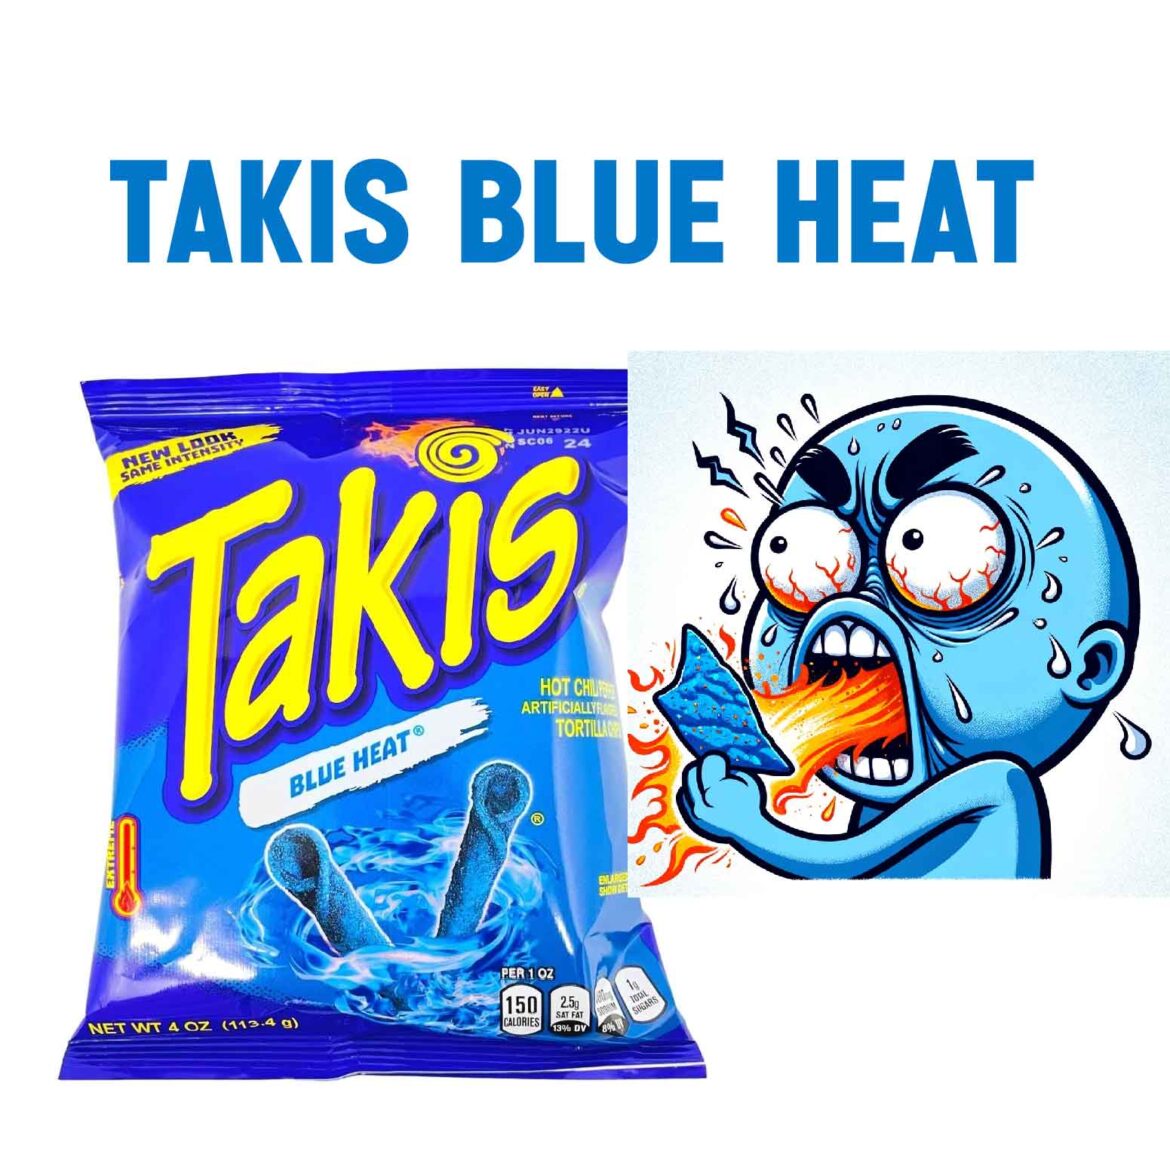 Why Takis Blue Heat is Leading the Latest Snack Food Trends